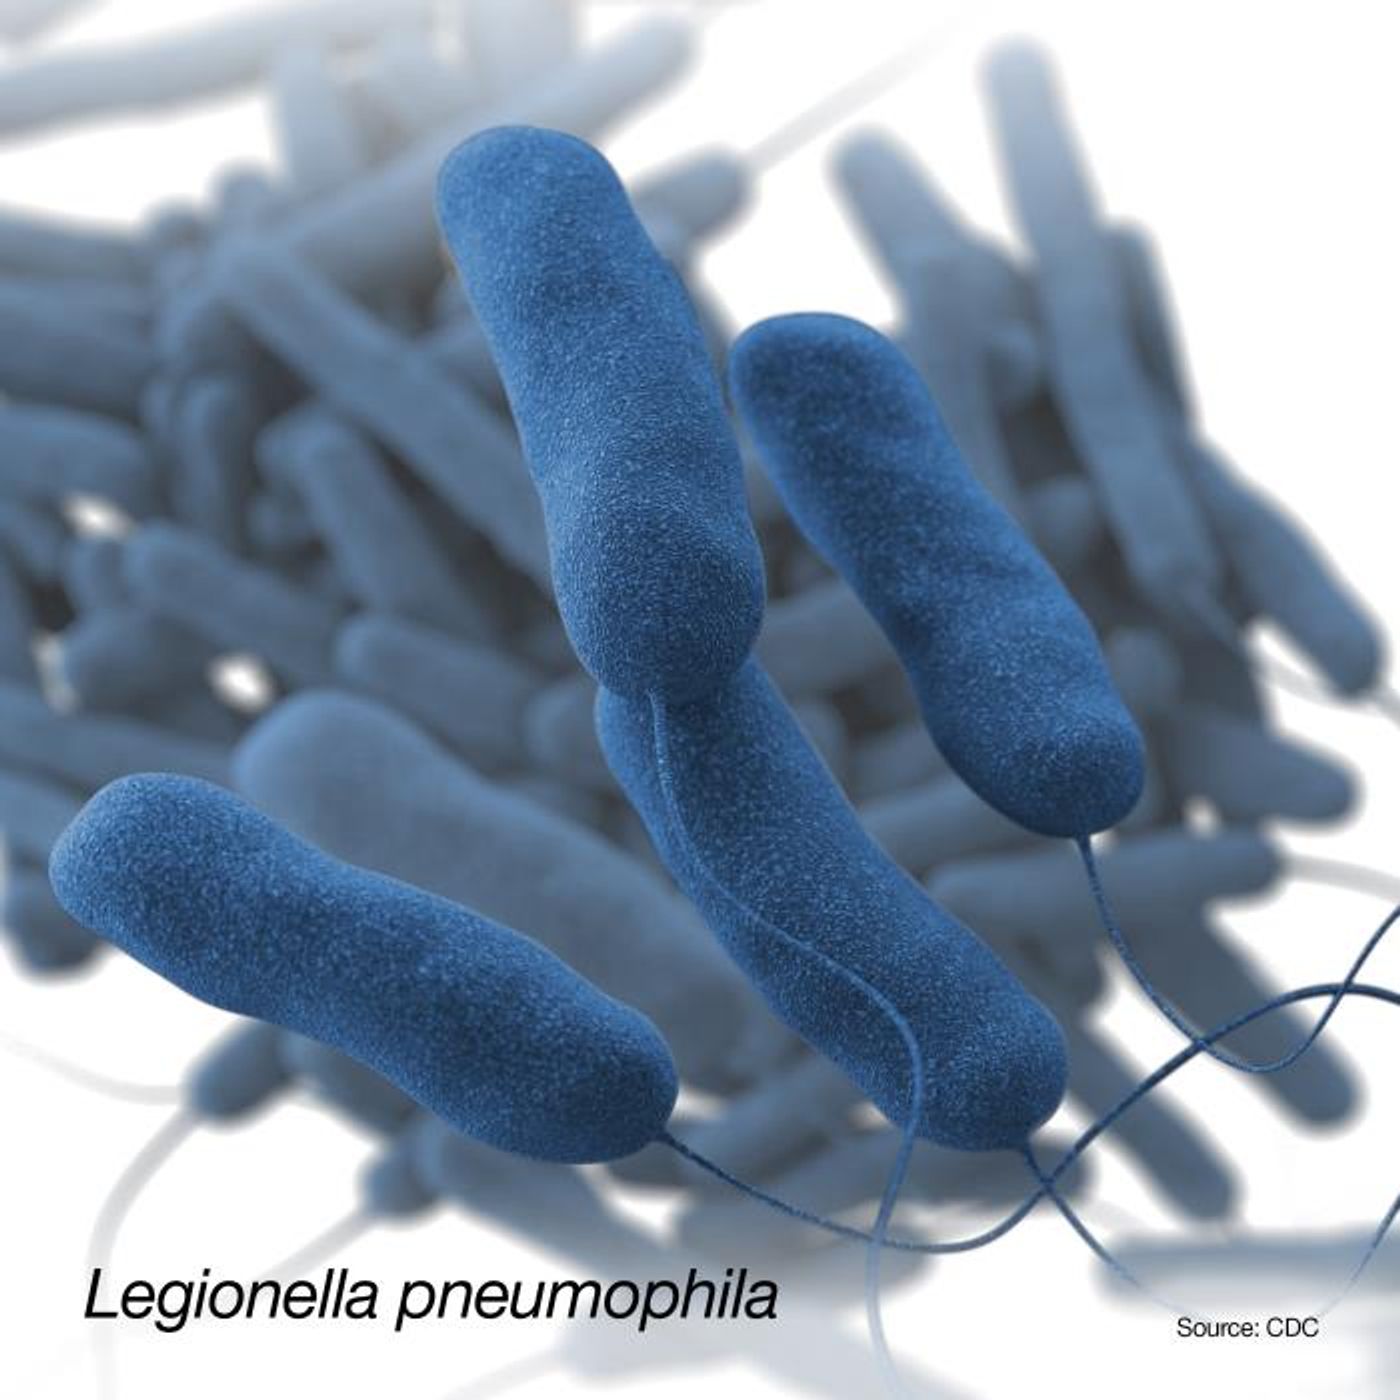 A 3D, computer-generated image of a group of Gram-negative, Legionella pneumophila, bacteria. The recreation was based on SEM imagery. / Credit: CDC/ Sarah Bailey Cutchin / Illustrator: Dan Higgins